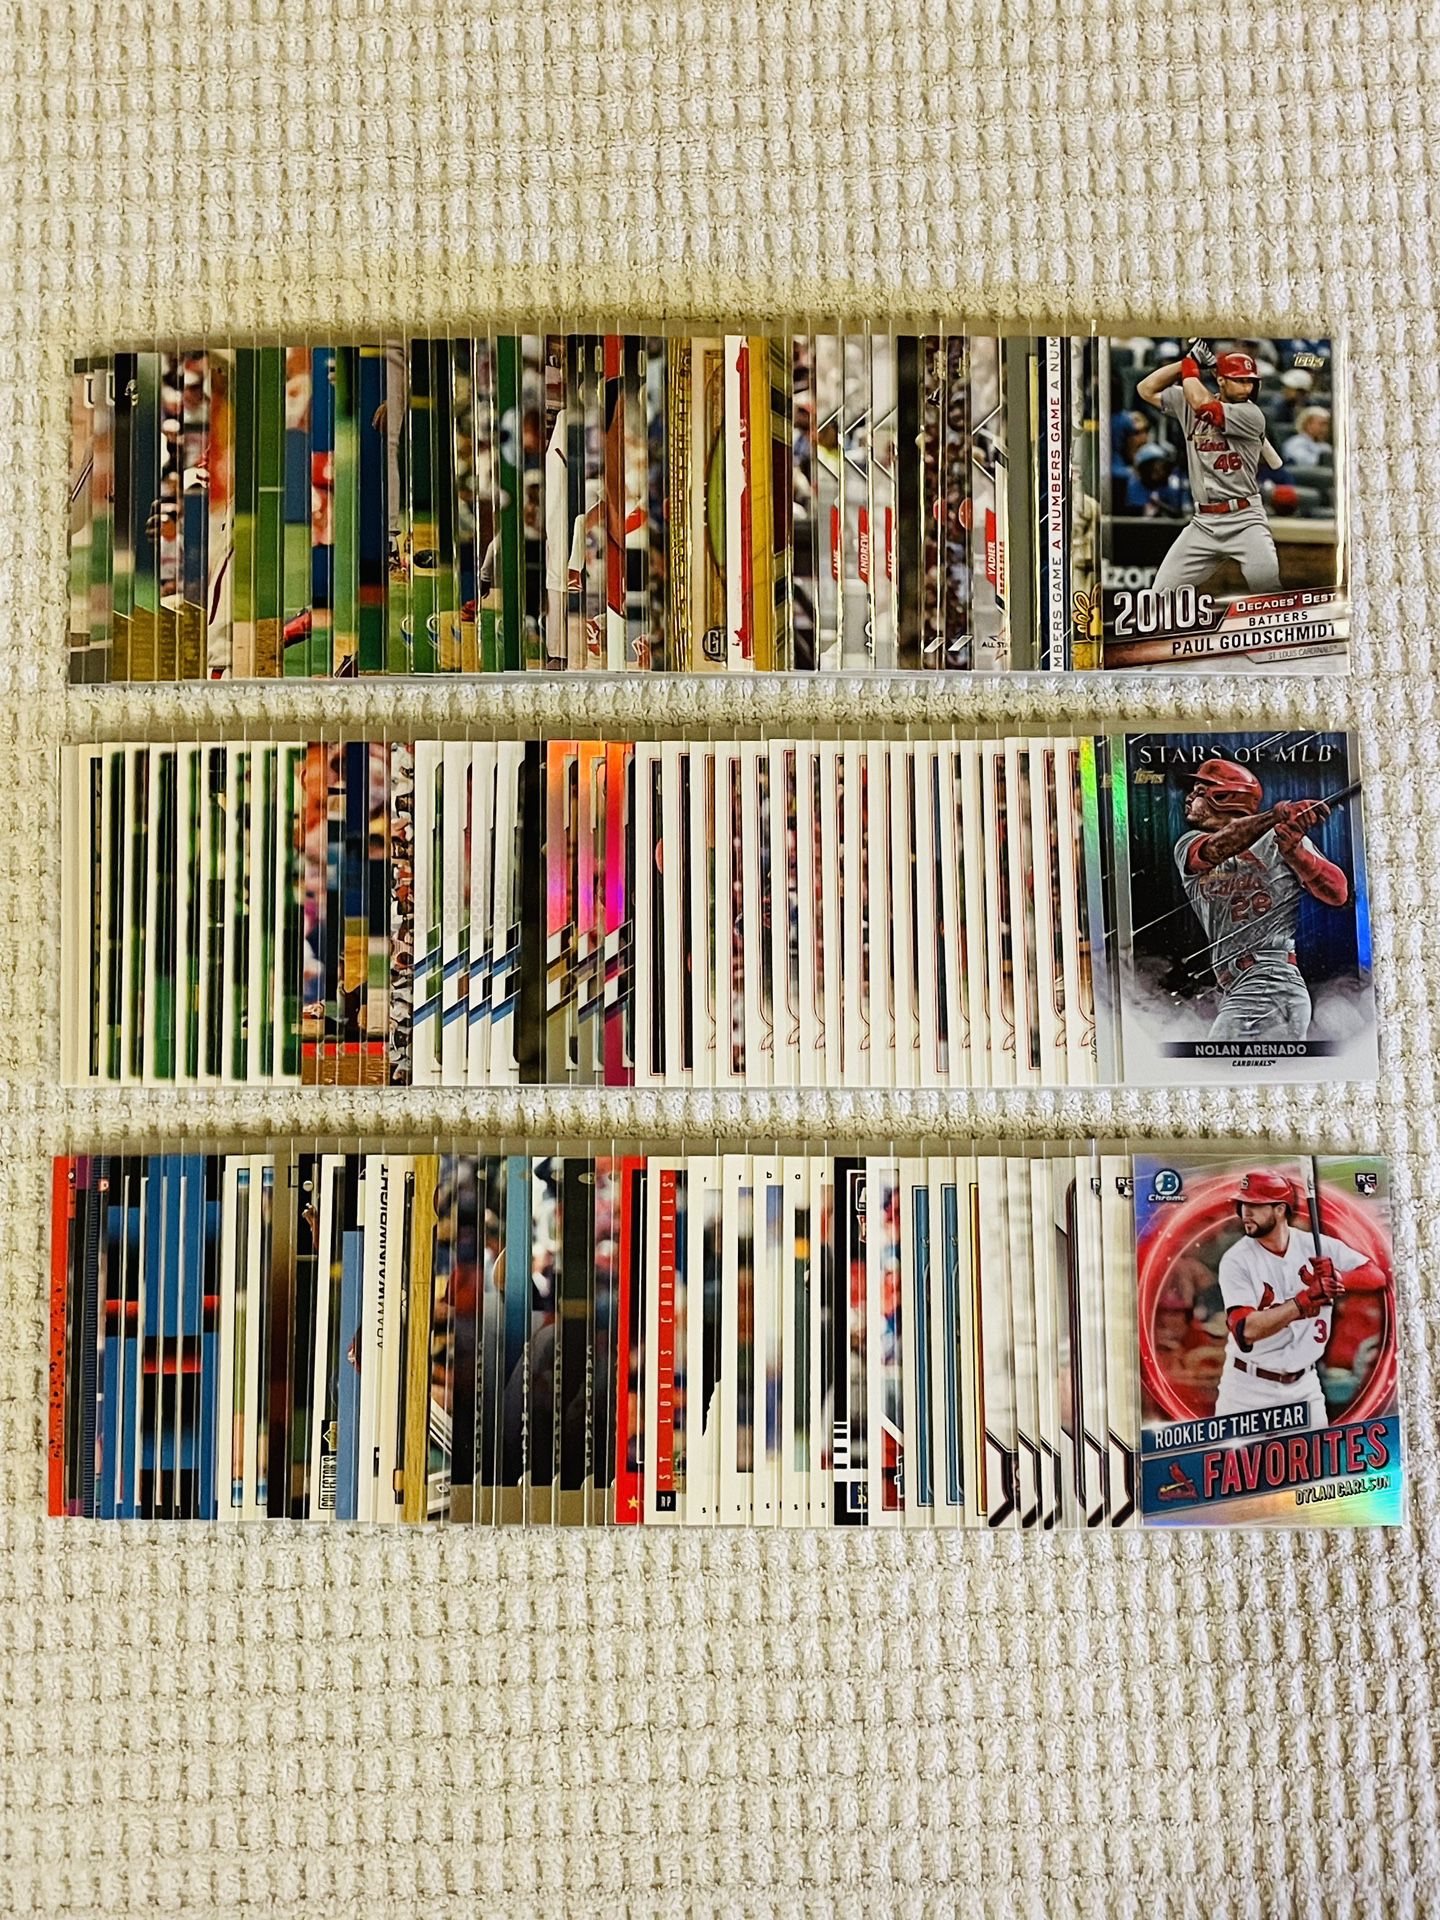 The ULTIMATE St. Louis Cardinals Baseball Card Collection